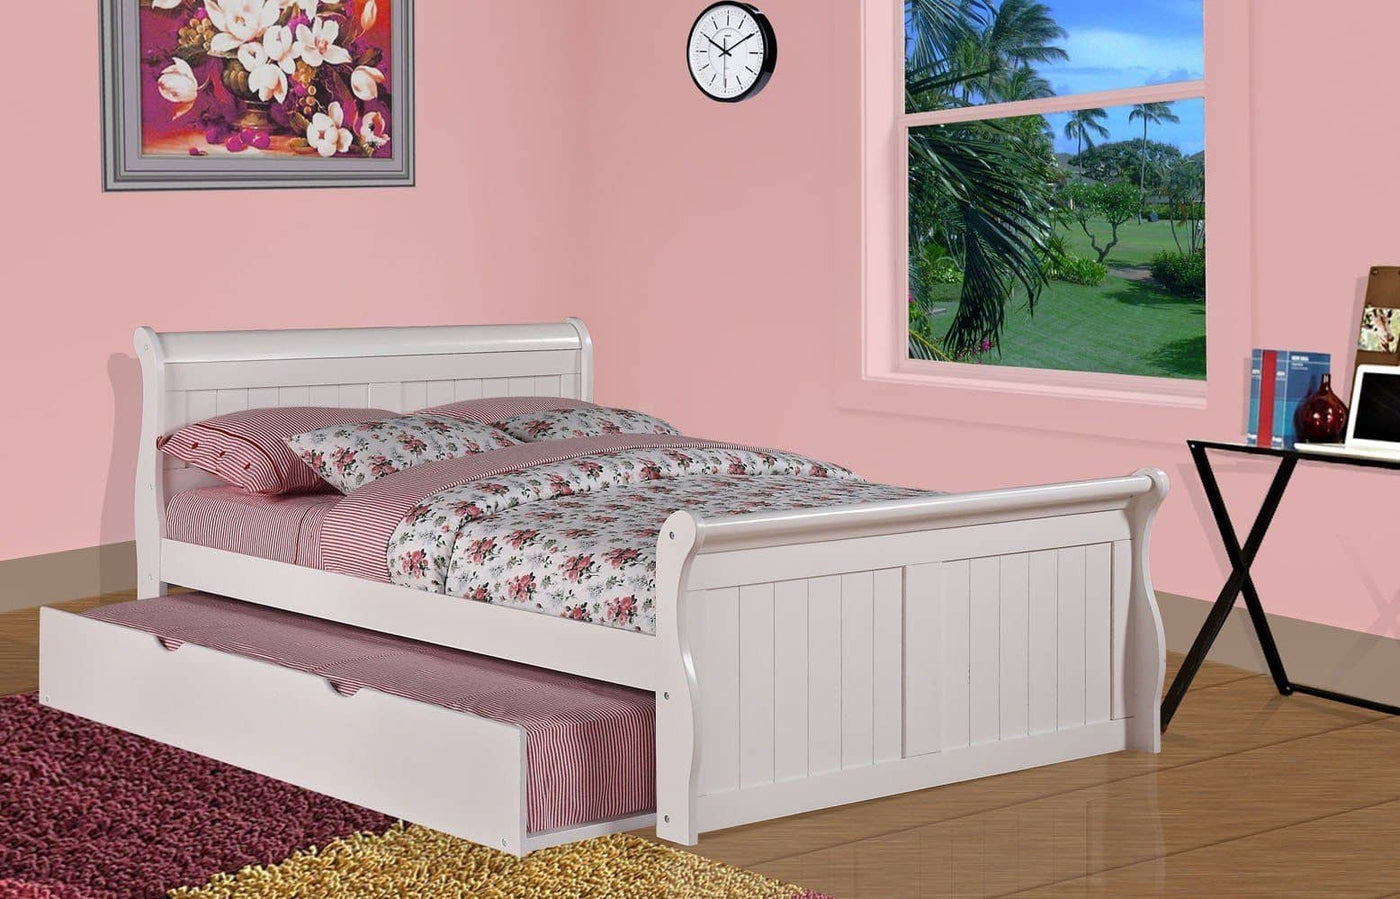 Kylie Full Sleigh Bed with Trundle Custom Kids Furniture